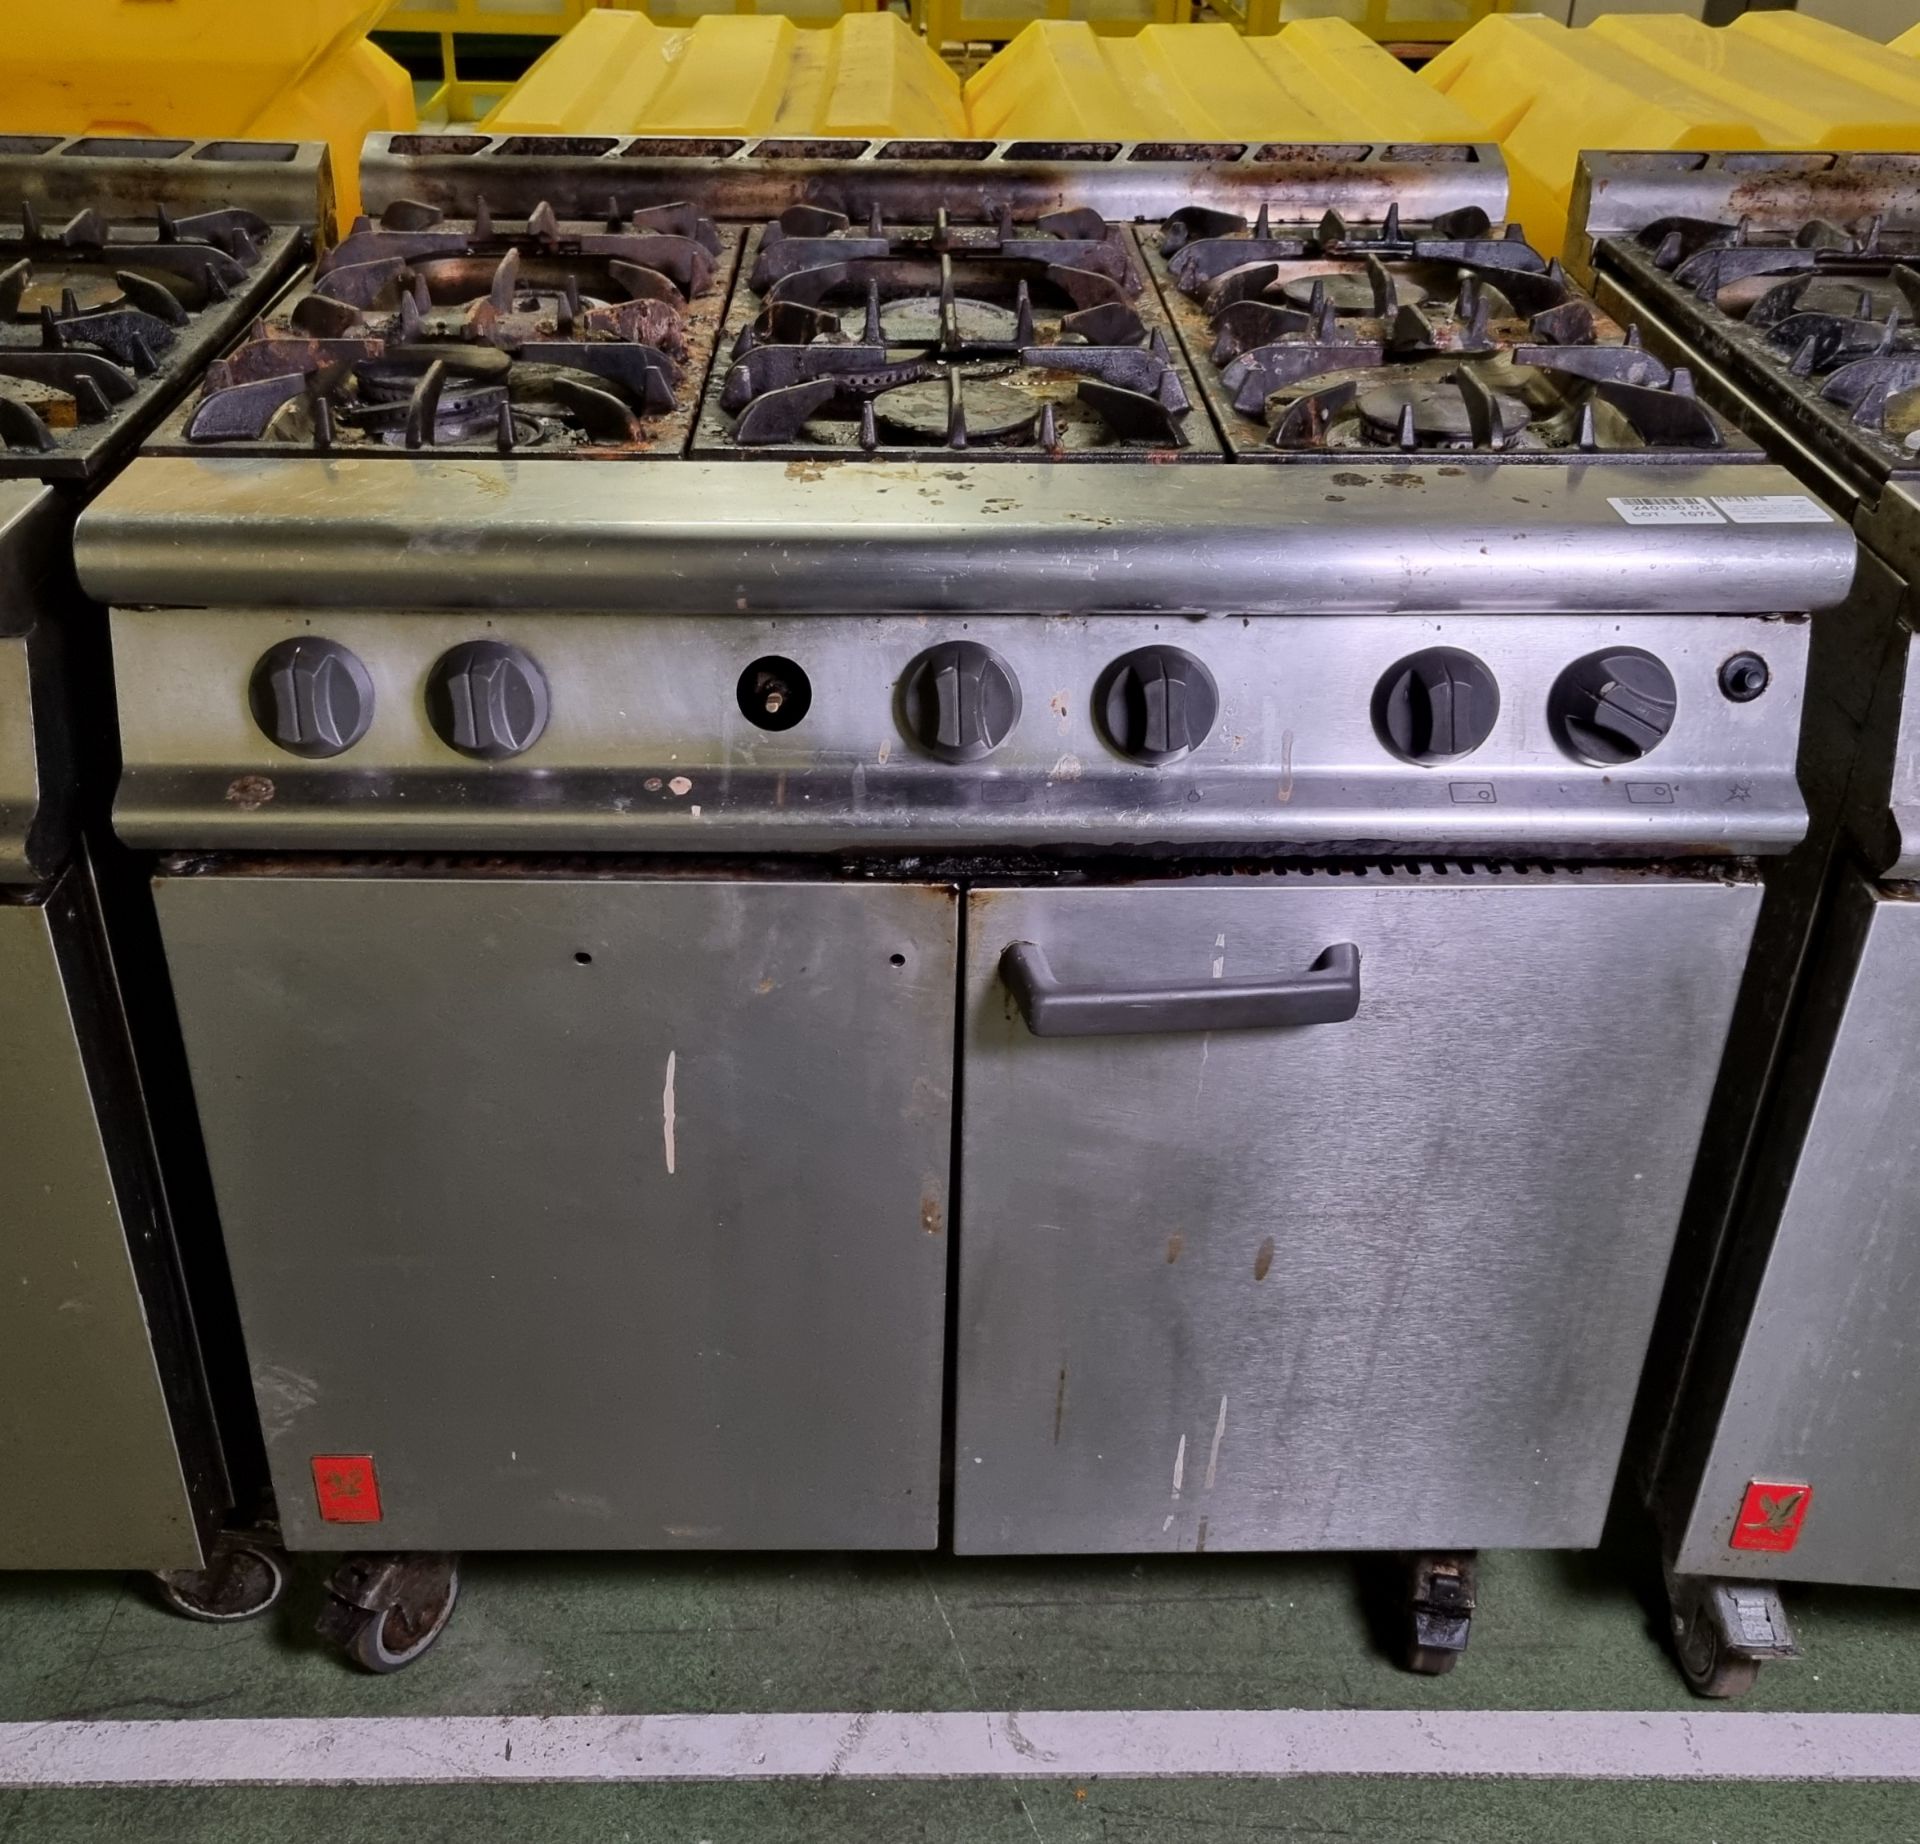 Falcon G3101 6-burner gas oven range - W 900 x D 780 x H 900mm - MISSING CONTROL KNOB AND HANDLE